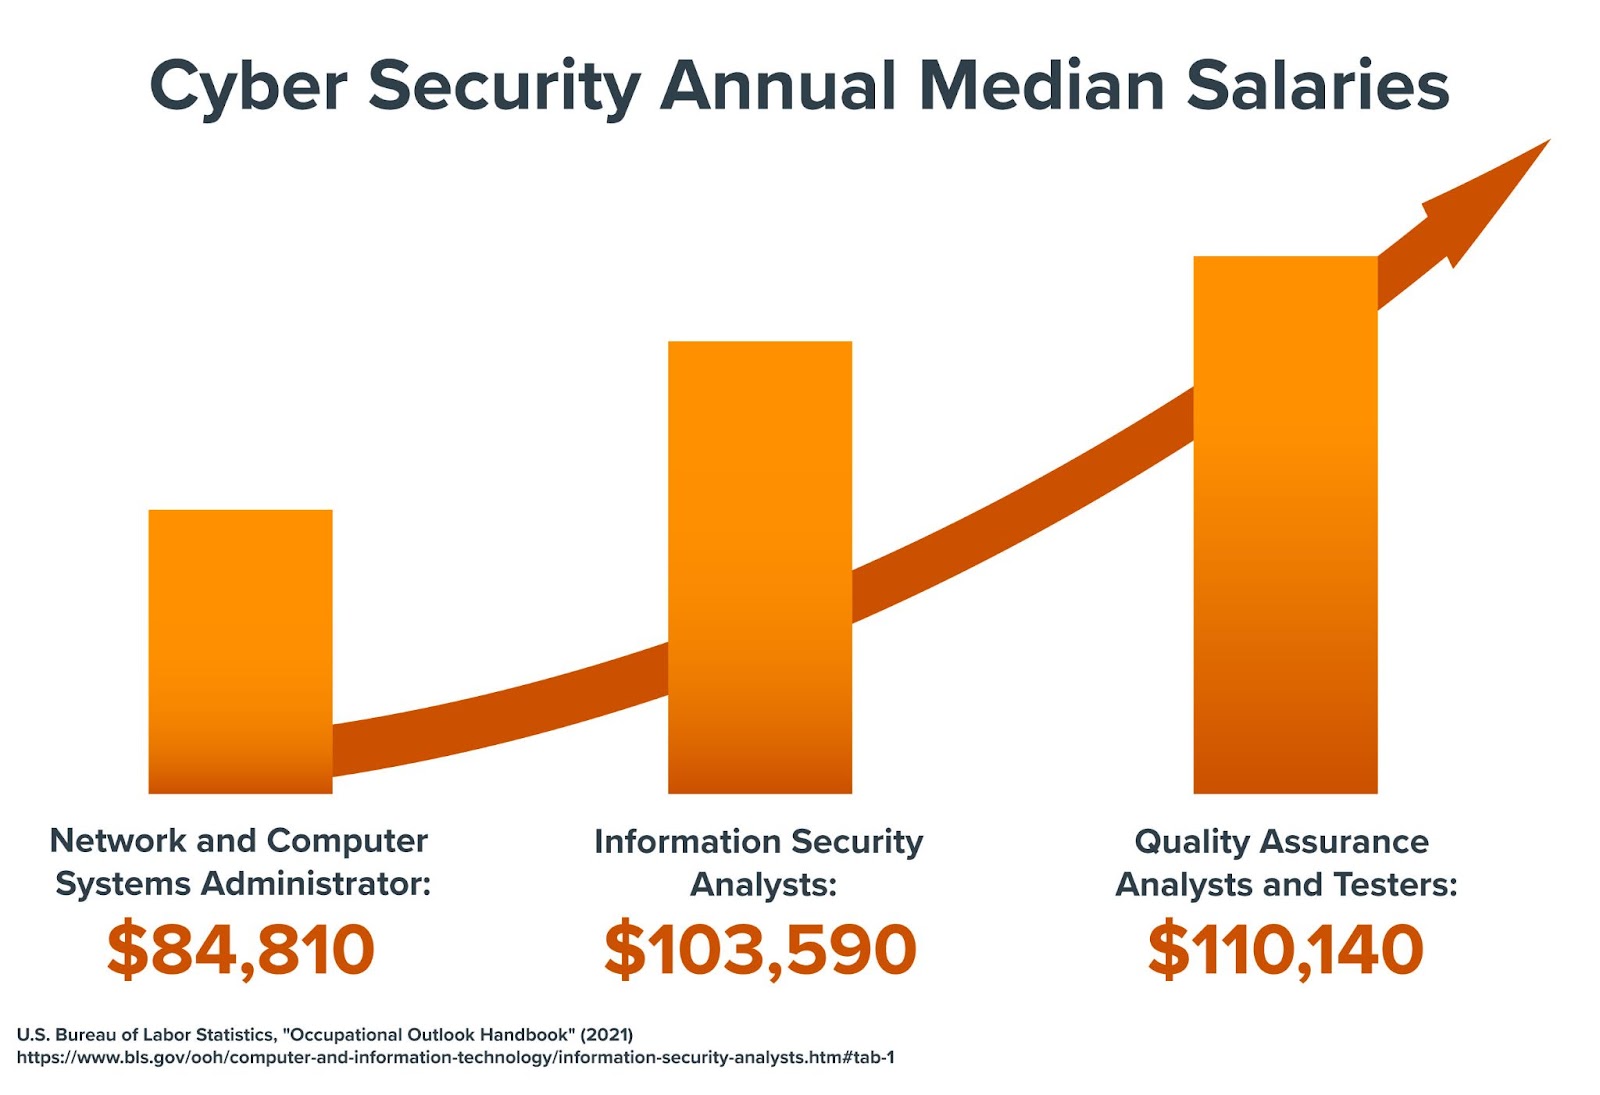 An image depicting three median salaries of cyber security positions.